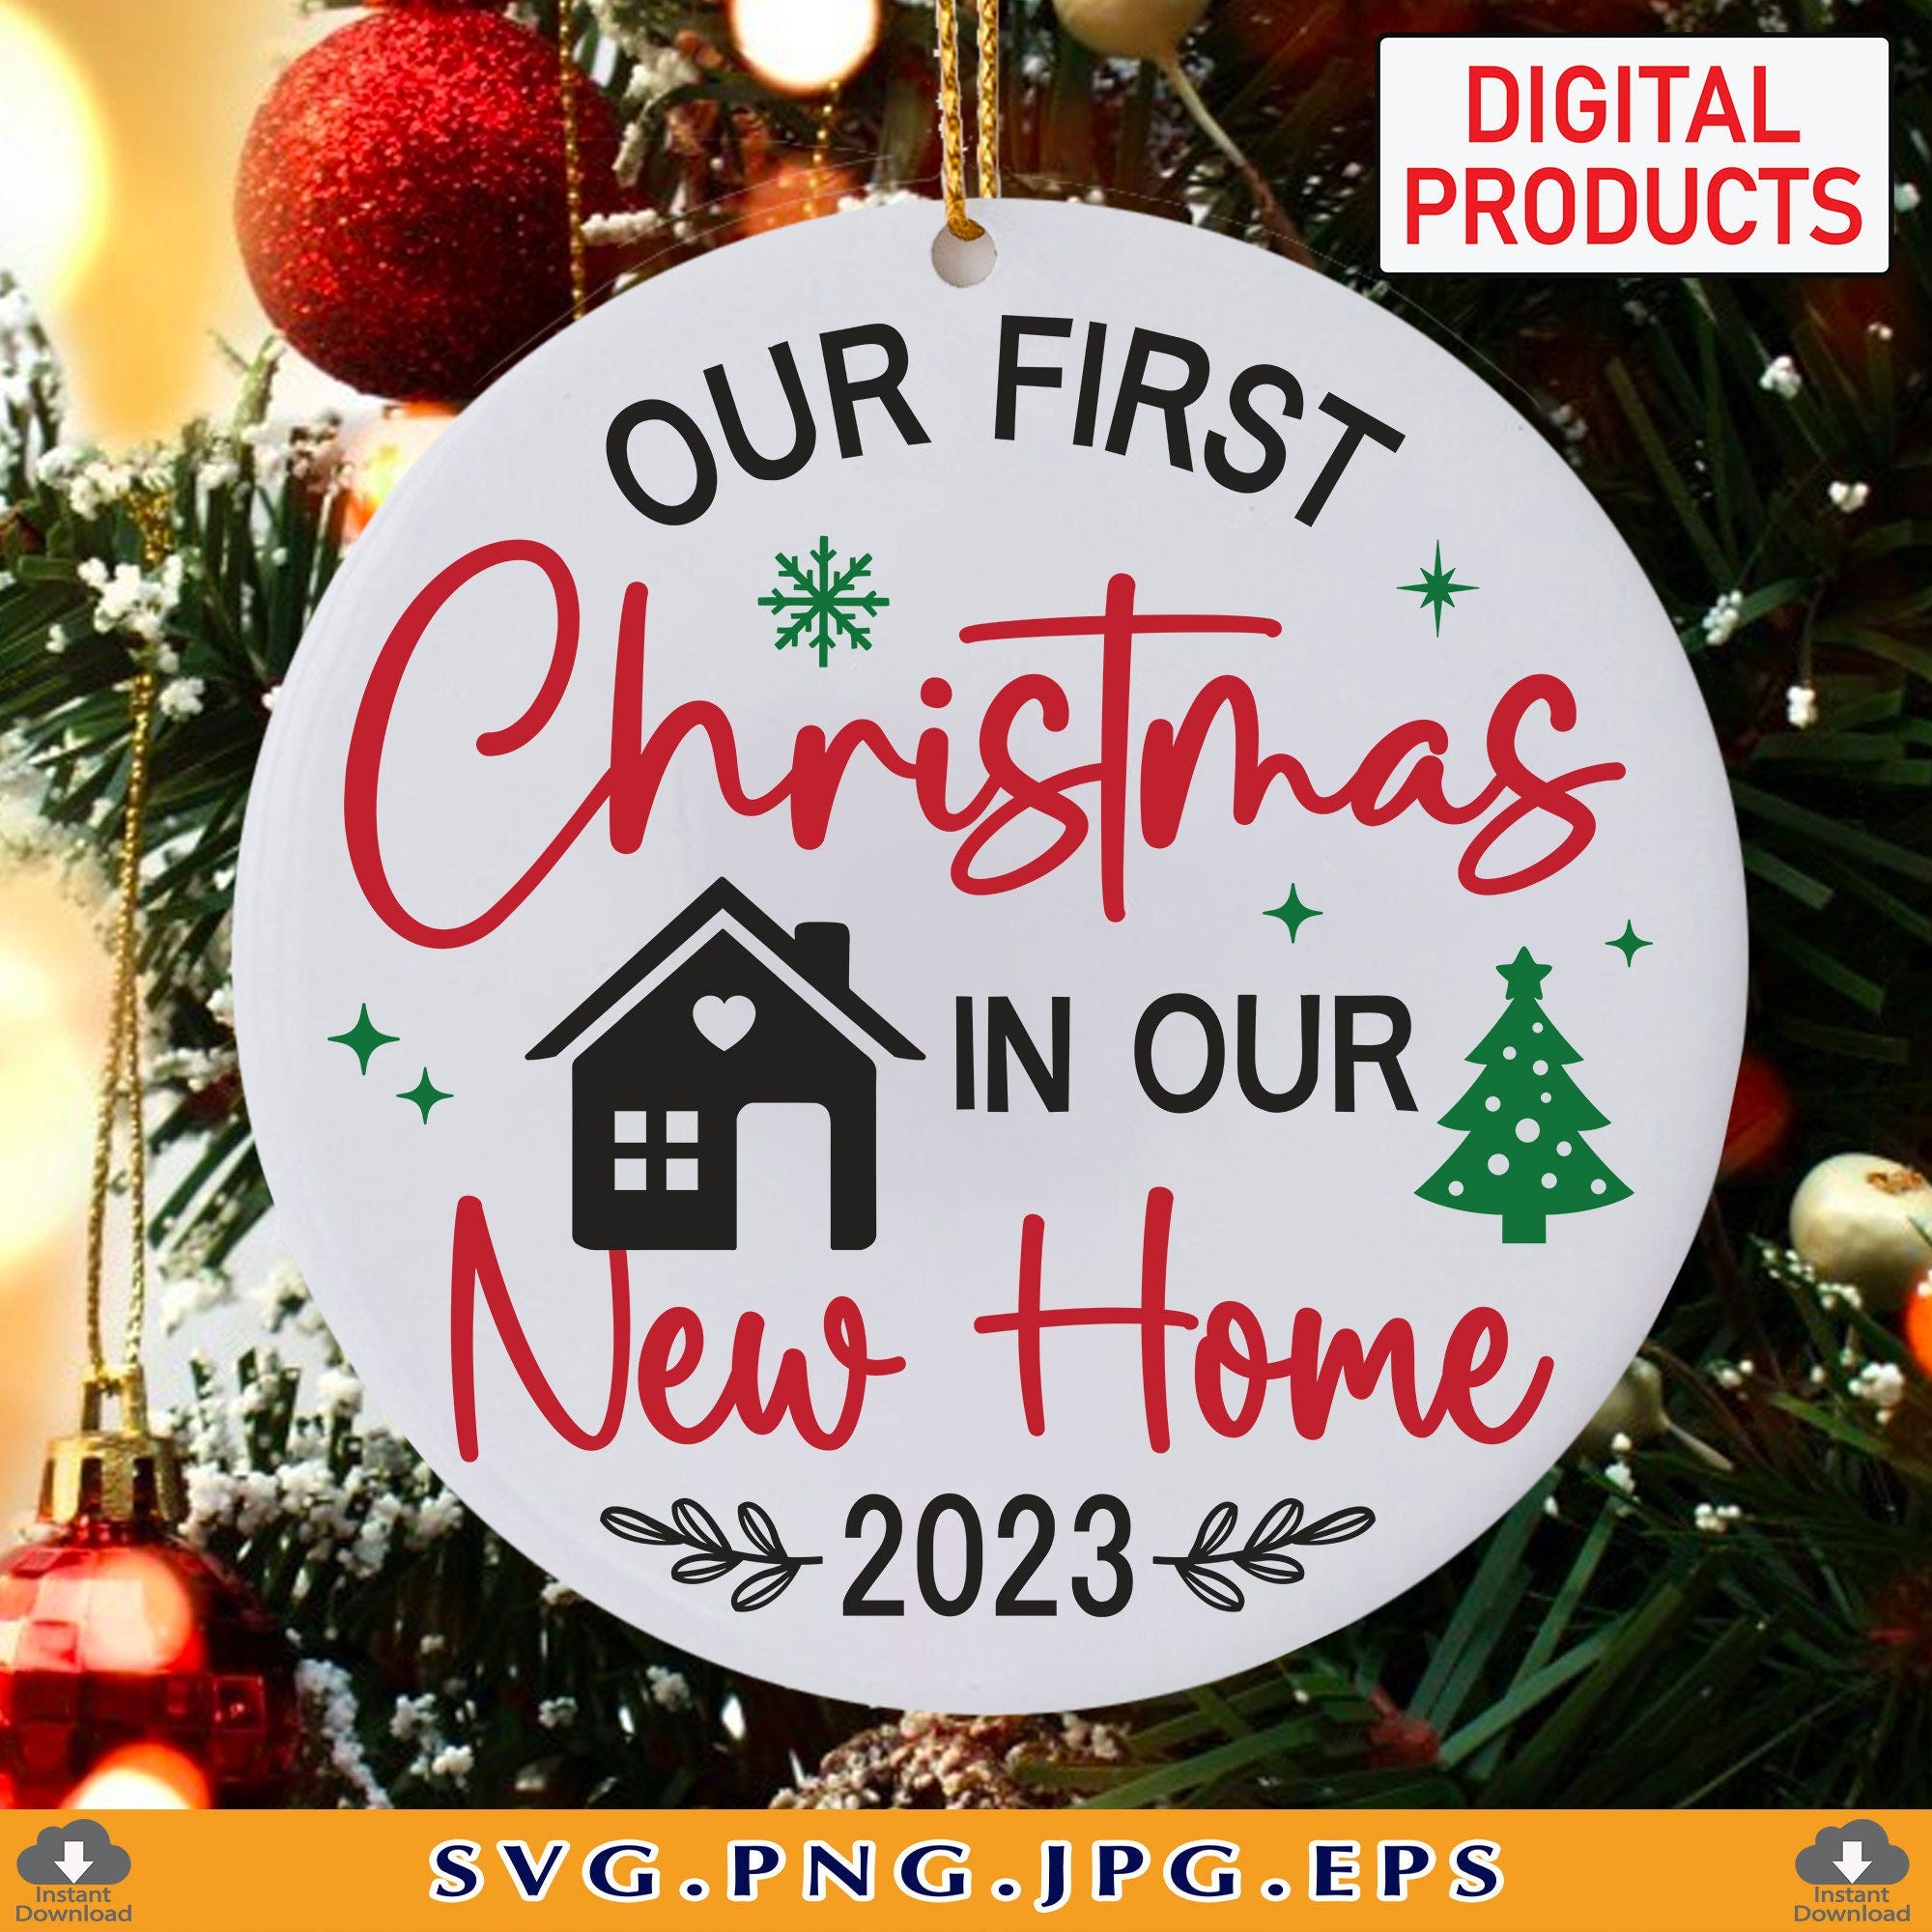 Our First Christmas in Our New Home SVG, 2023 Christmas Ornament SVG, Housewarming Gift,1st Christmas Home, Xmas, Files For Cricut, Svg, PNG